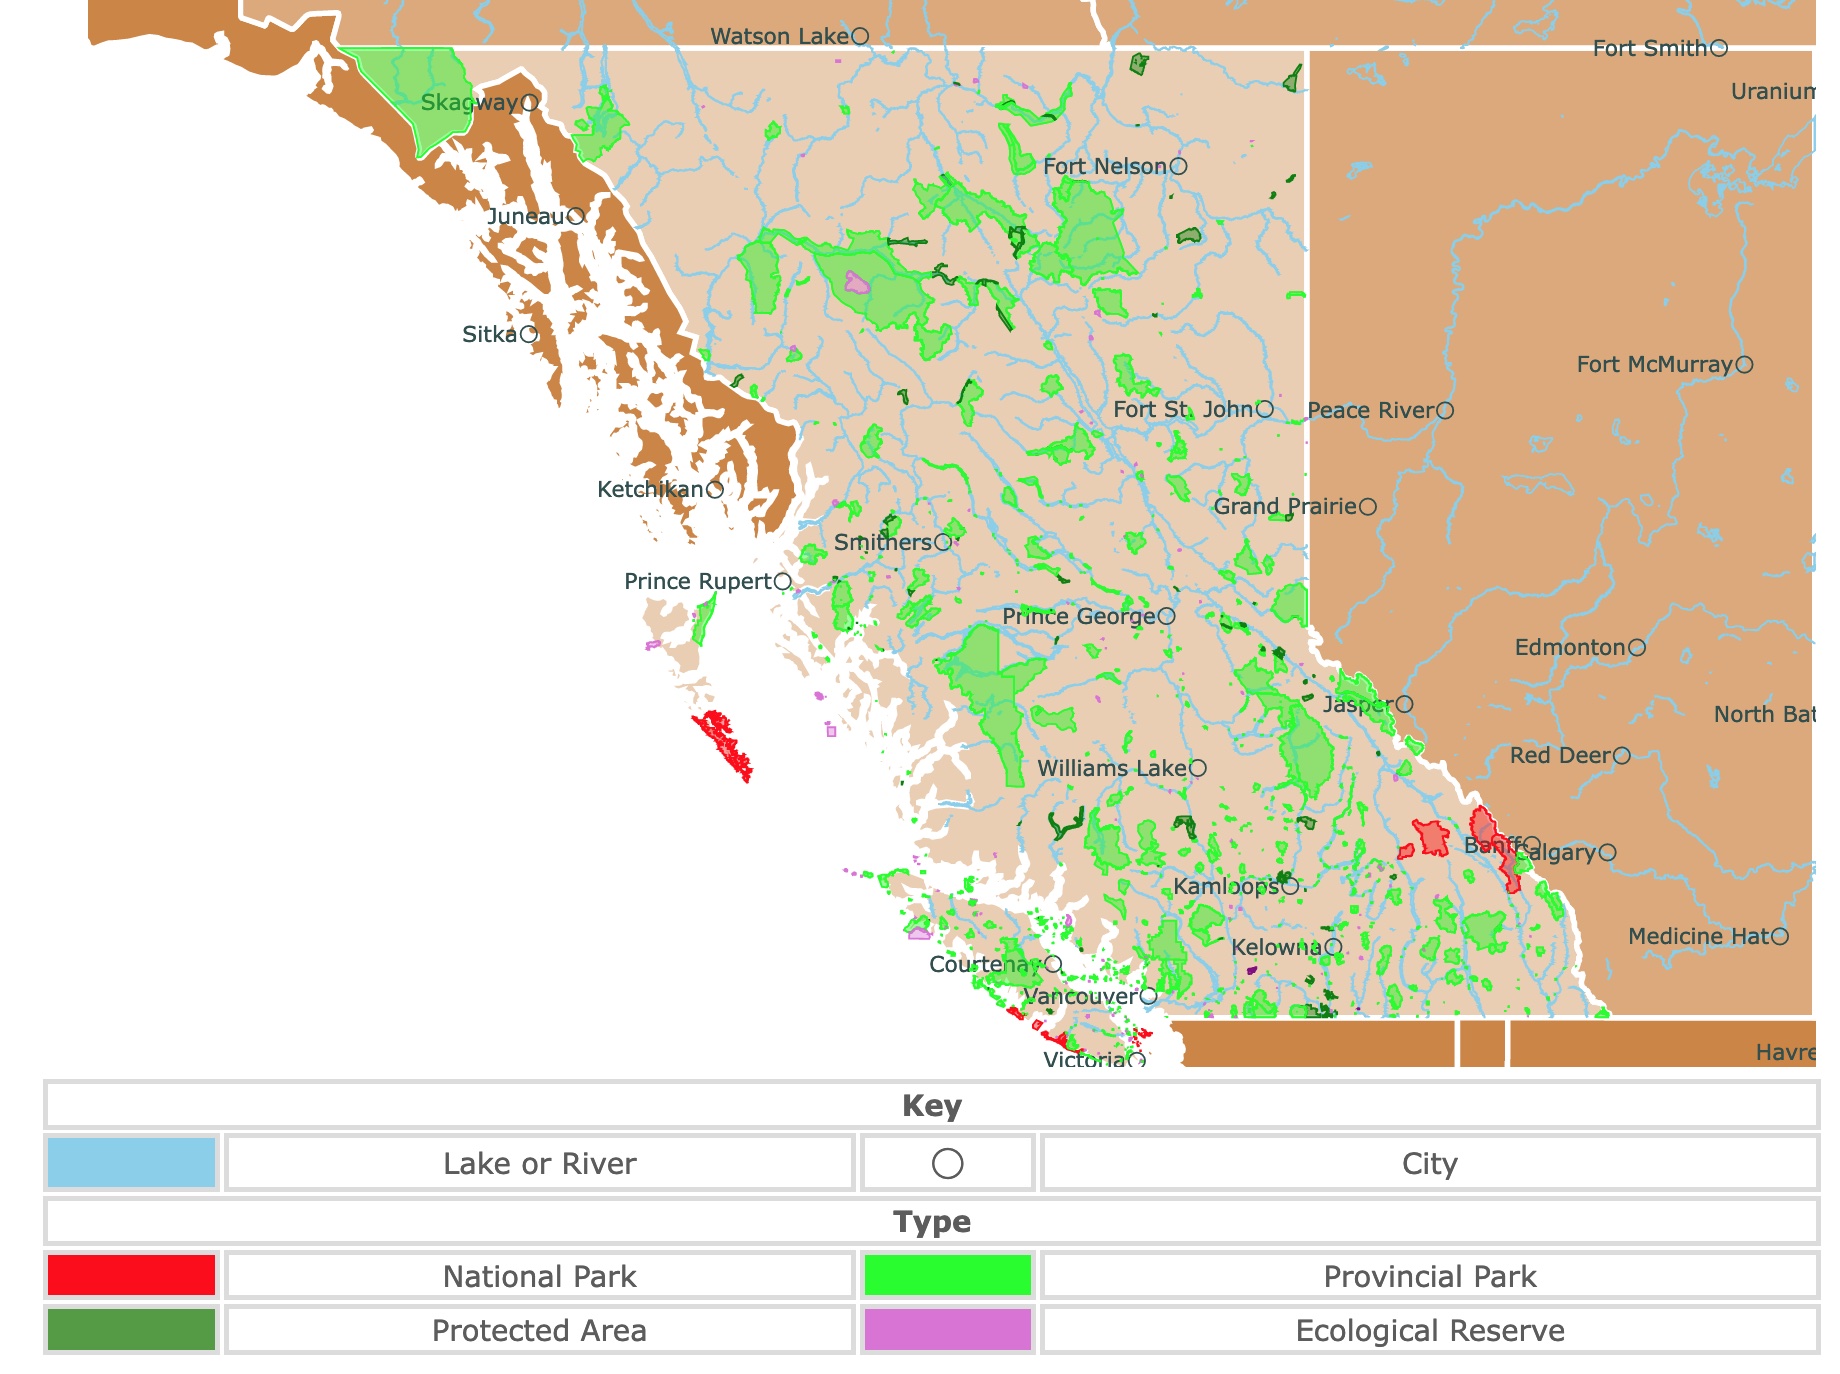 Map of British Columbia's state parks, national parks, forests, and public lands areas